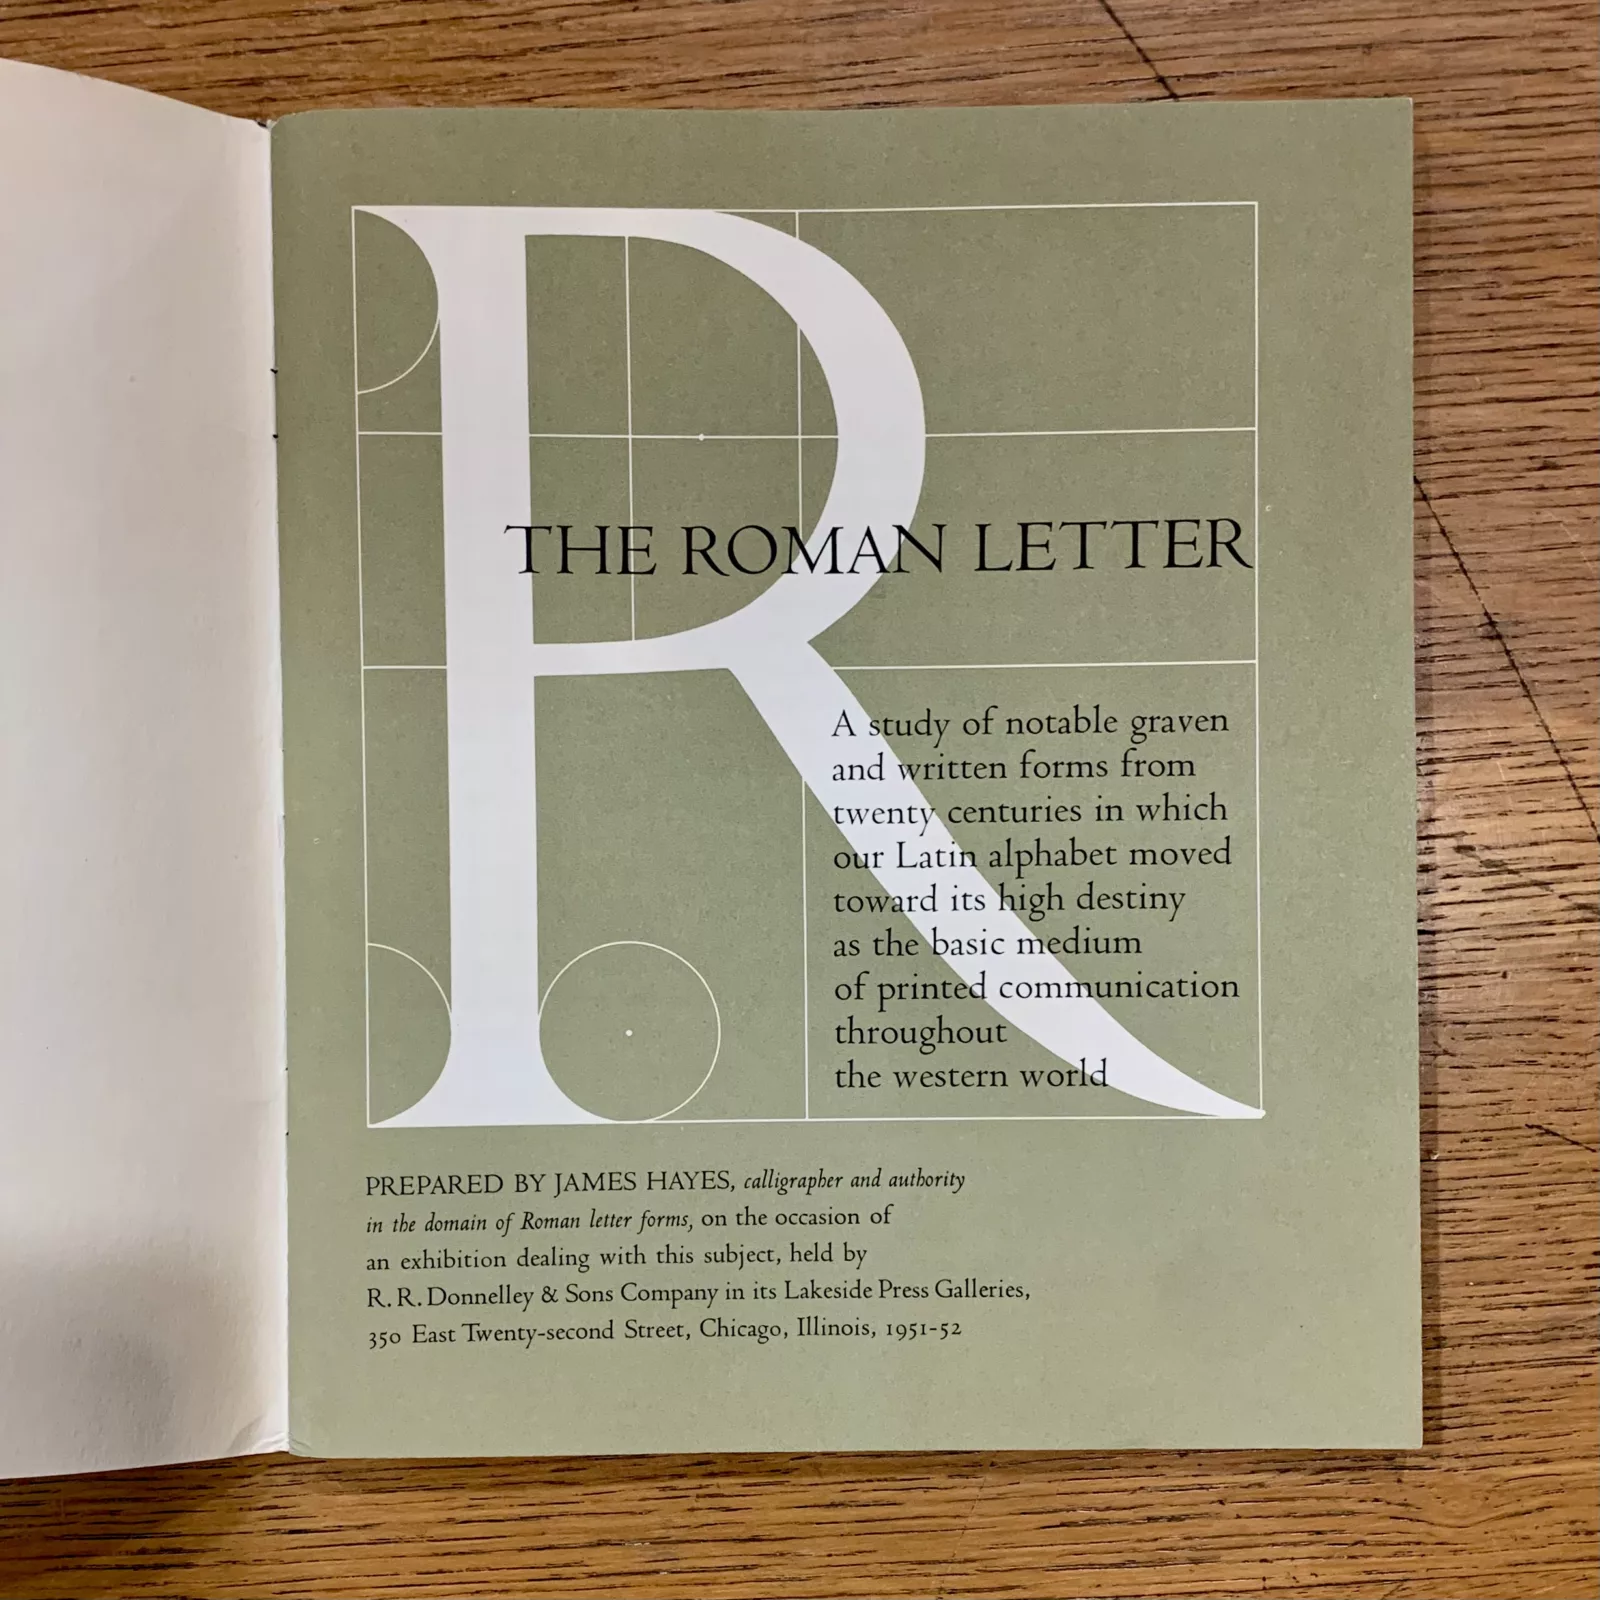 The inside front cover reads, "The Roman Letter. A study of notable graven and written forms from twenty centuries in which our Latin alphabet moved toward its high destiny as the basic medium of printed communication throughout the western world."